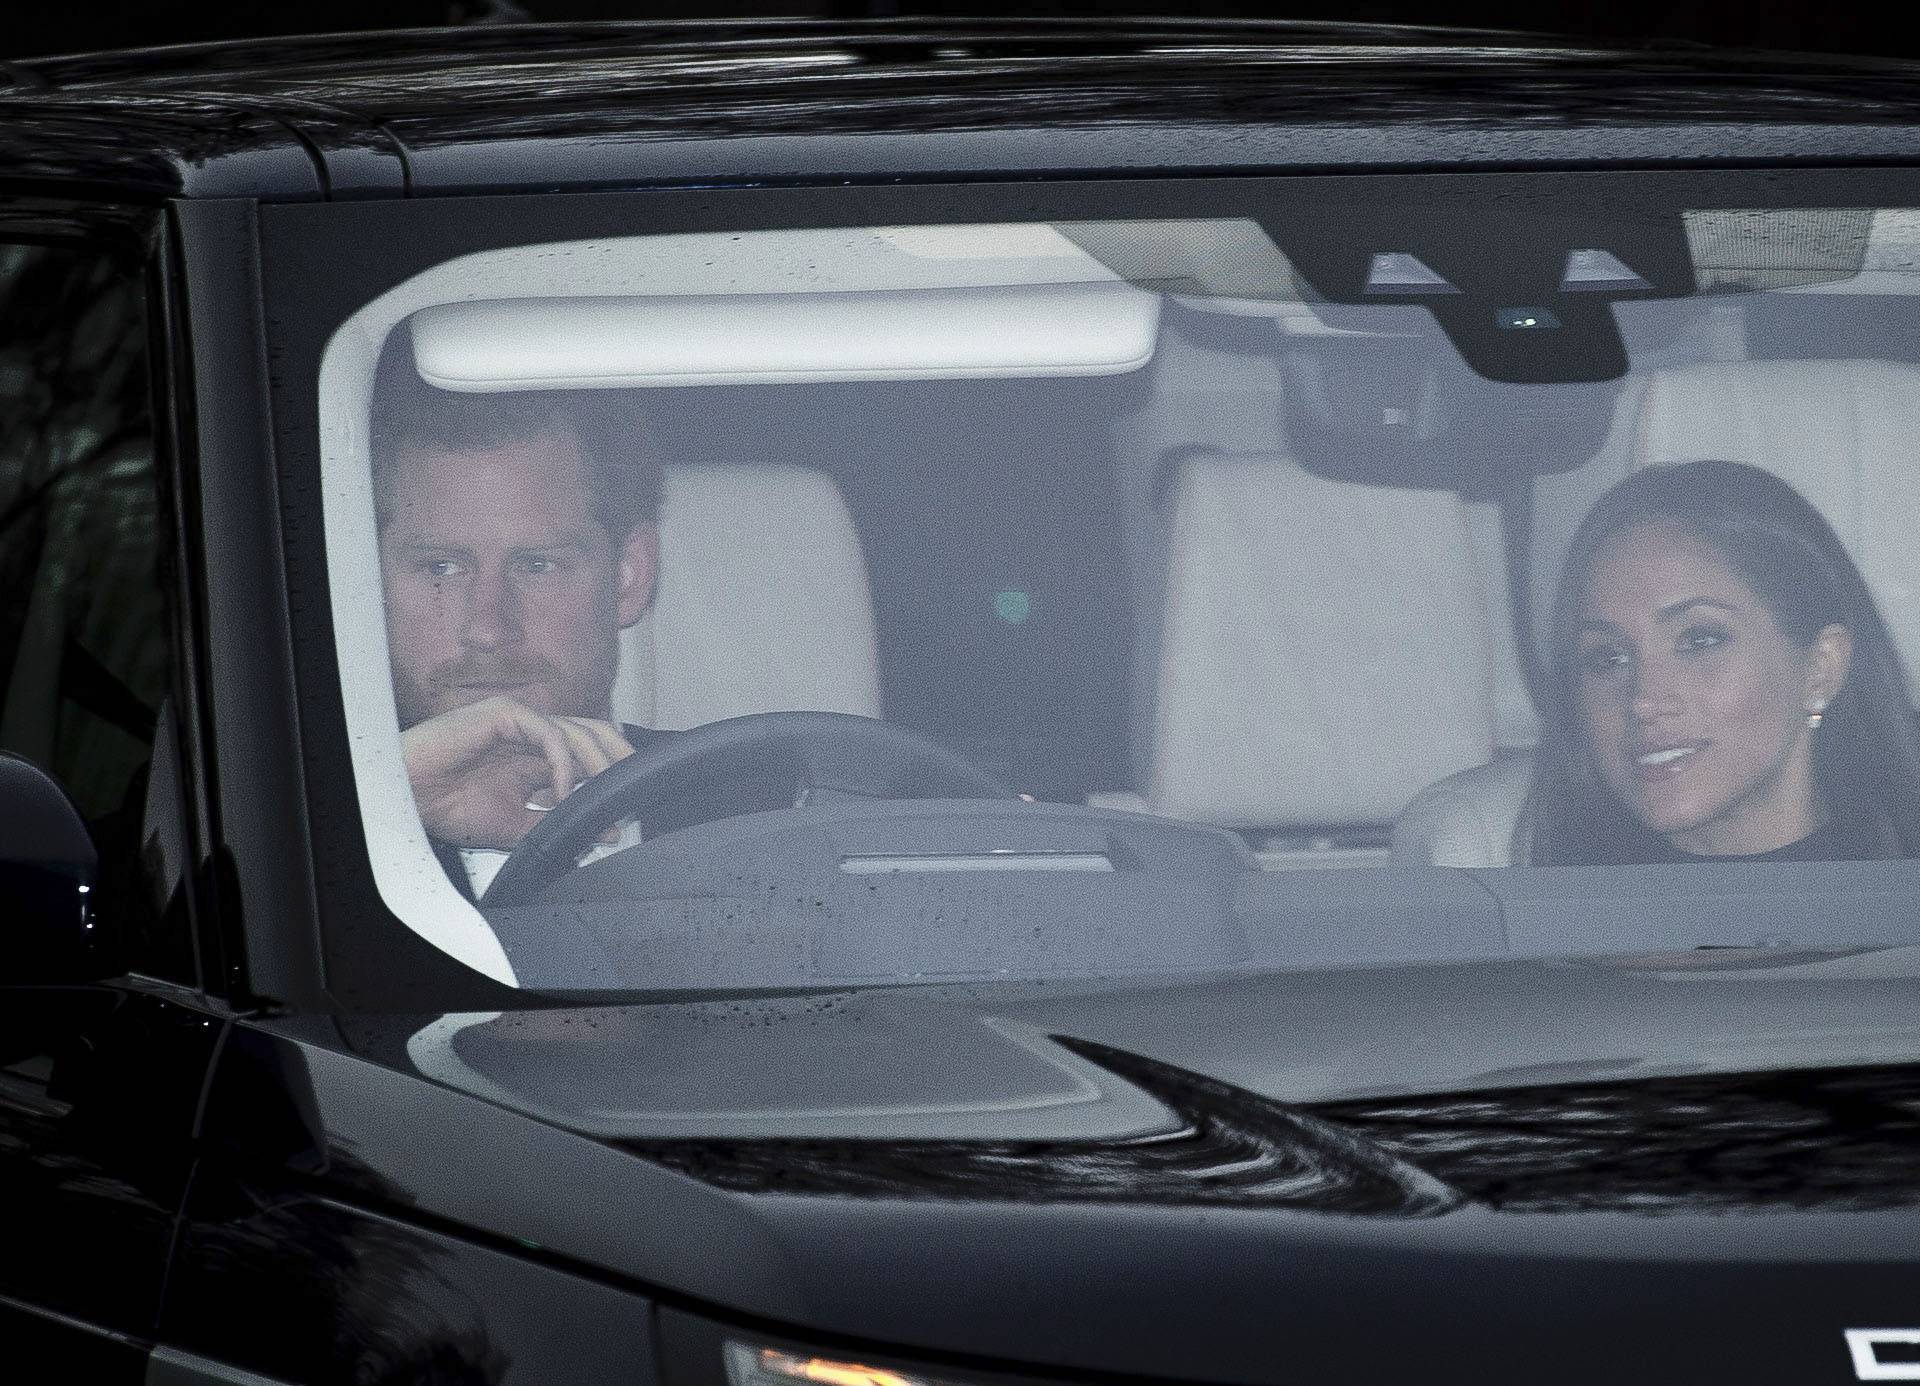 Prince Harry and Meghan Markle Christmas Lunch